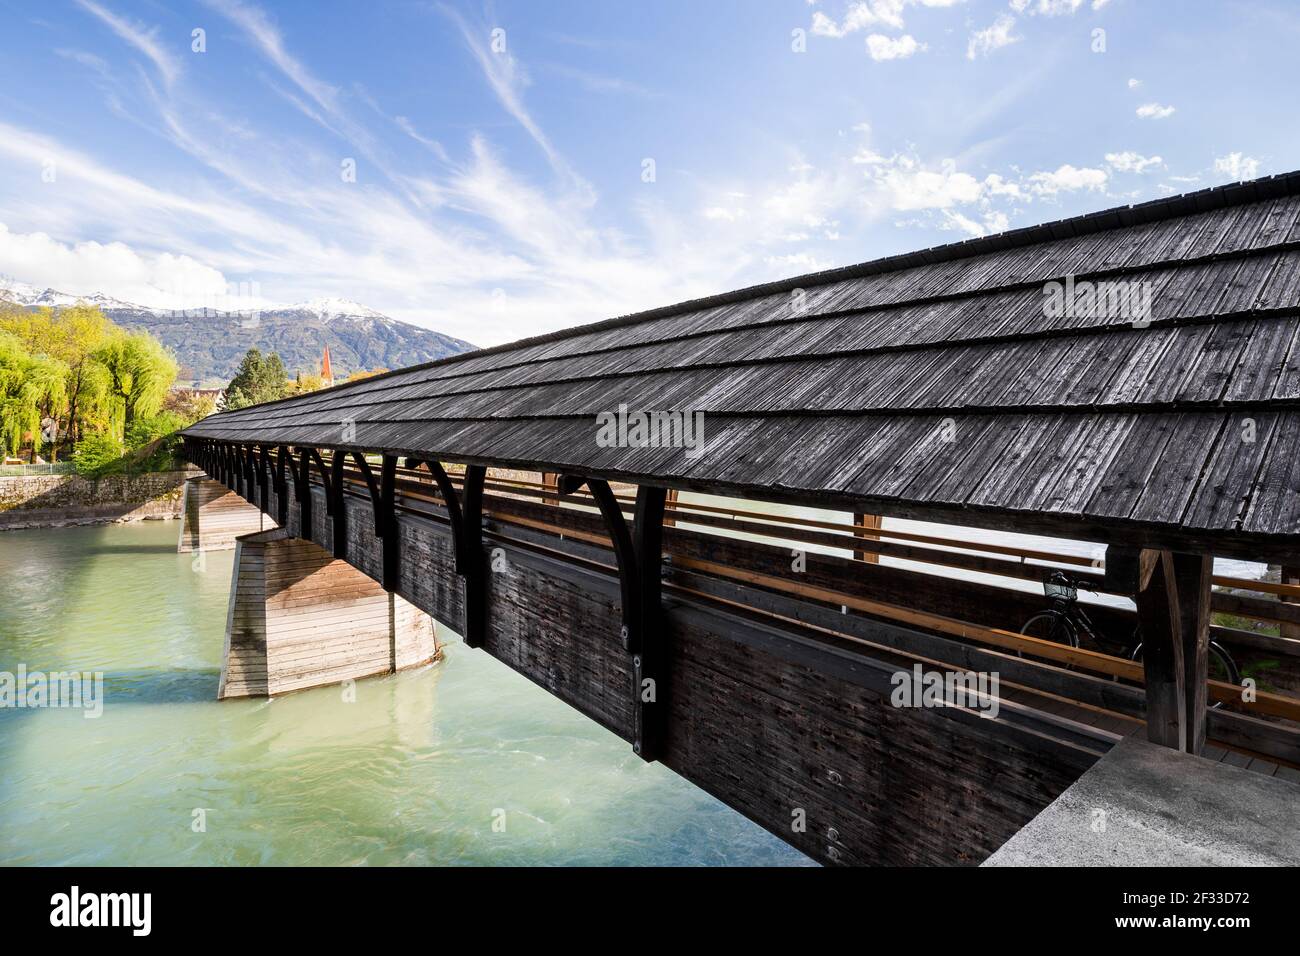 Wide angle view of a pedestrian covered bridge in Inssbruck, under a blue sky with streaked clouds Stock Photo